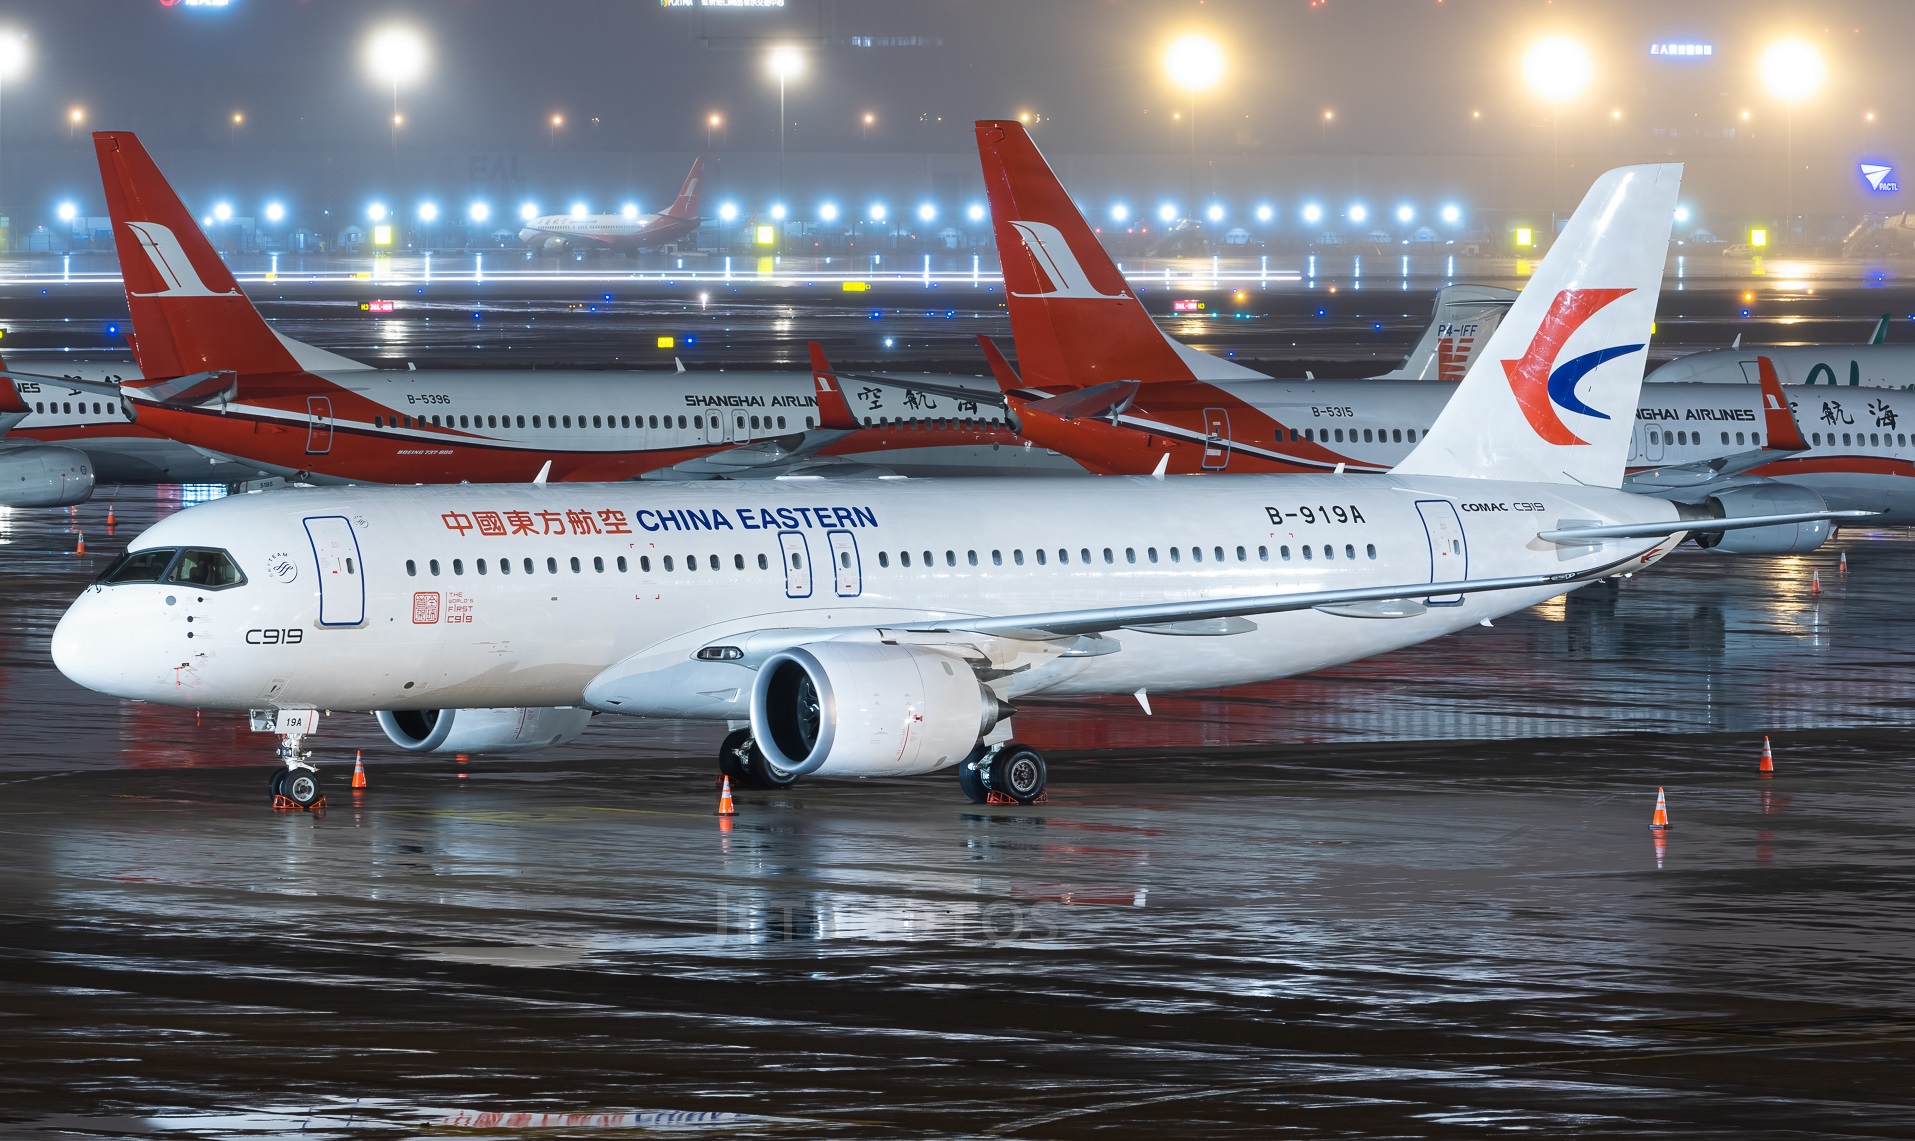 Chinese replacement of Boeing 737 and Airbus A320 – COMAC C919 – will start making commercial flights already on February 28th